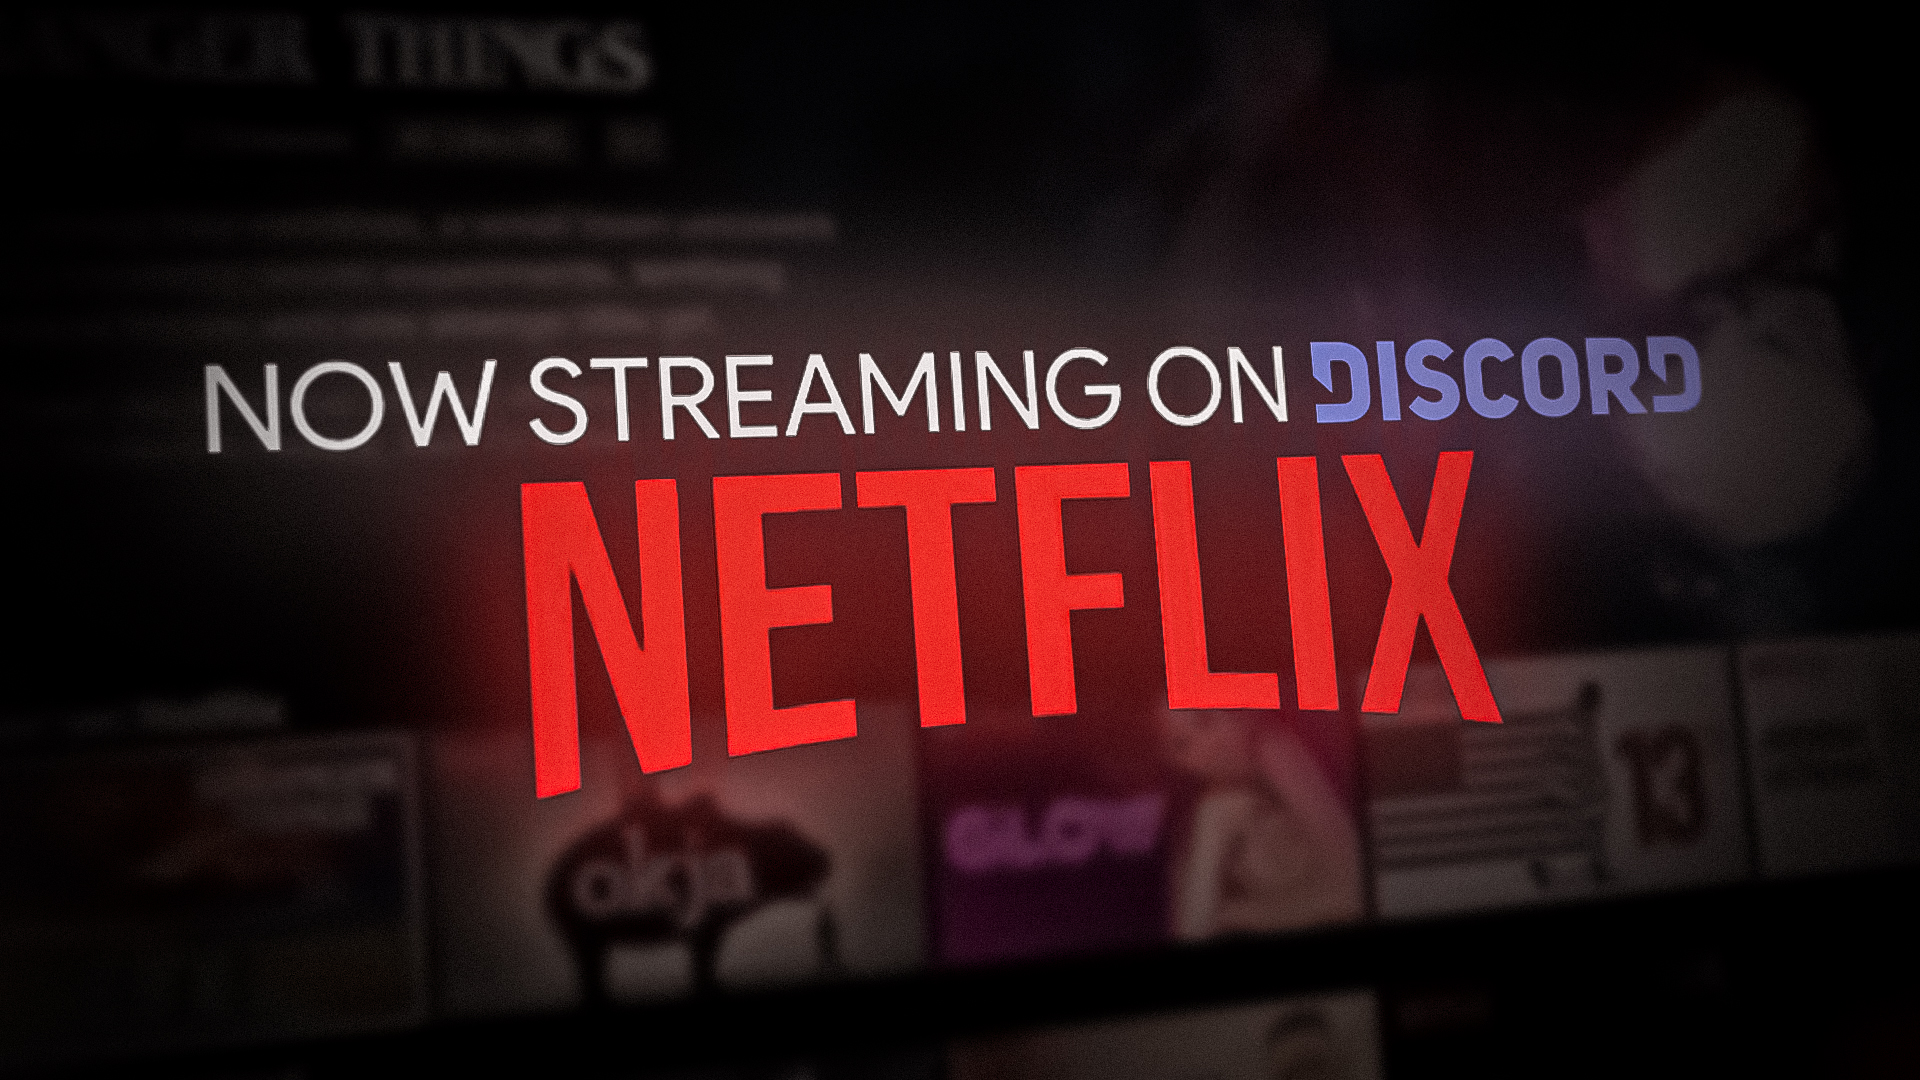 Streaming Netflix with your friends on Discord